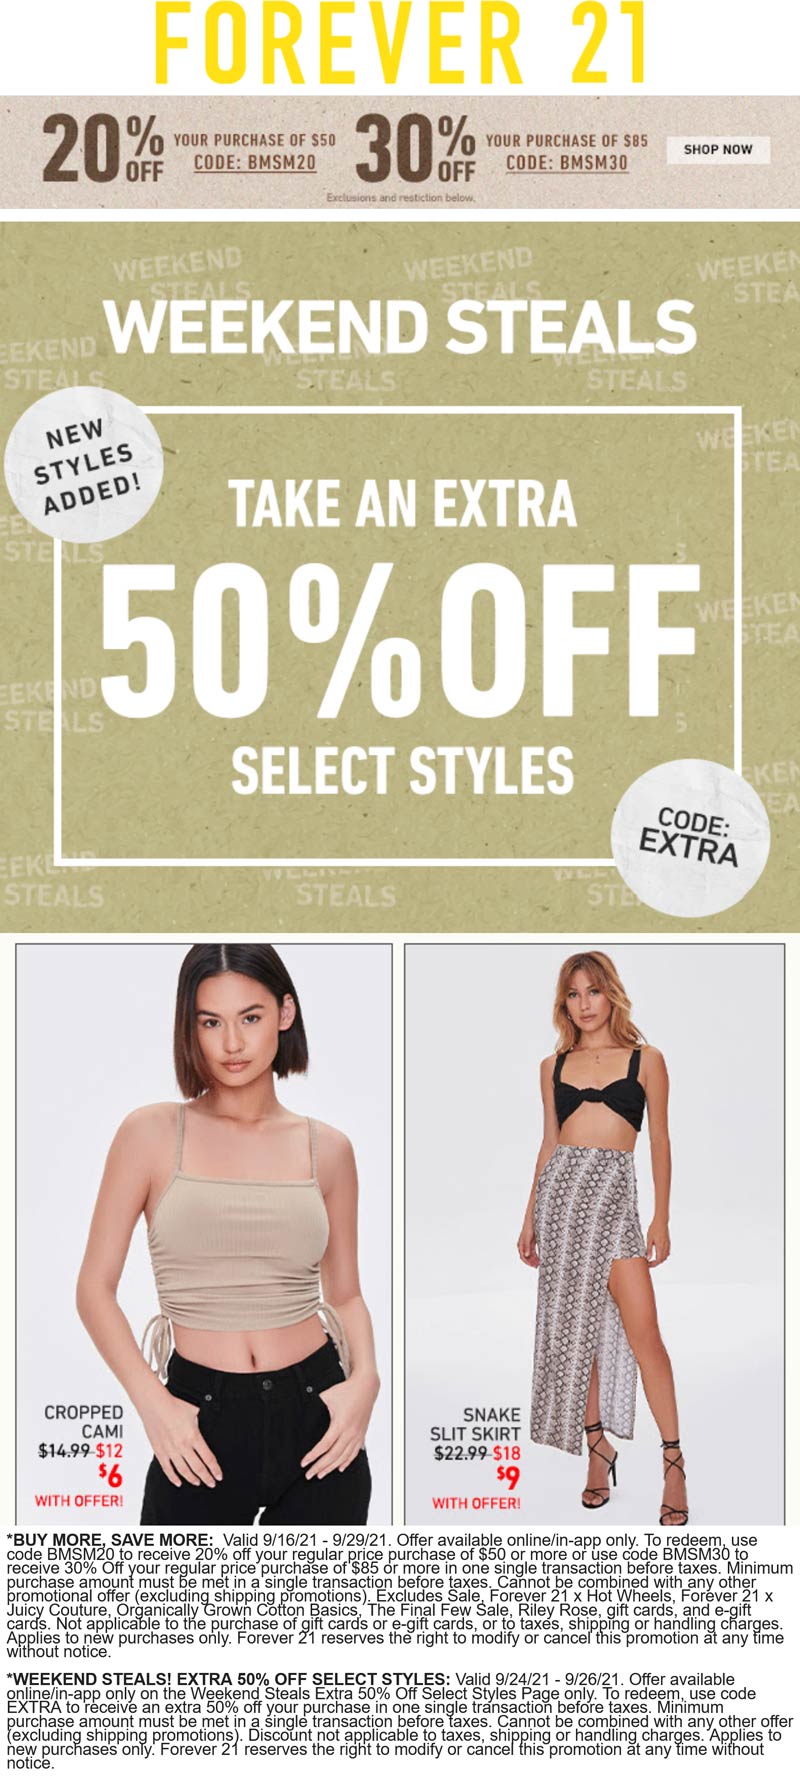 Forever 21 stores Coupon  20-30% off $50+ & more at Forever 21 via promo code BMSM20 #forever21 